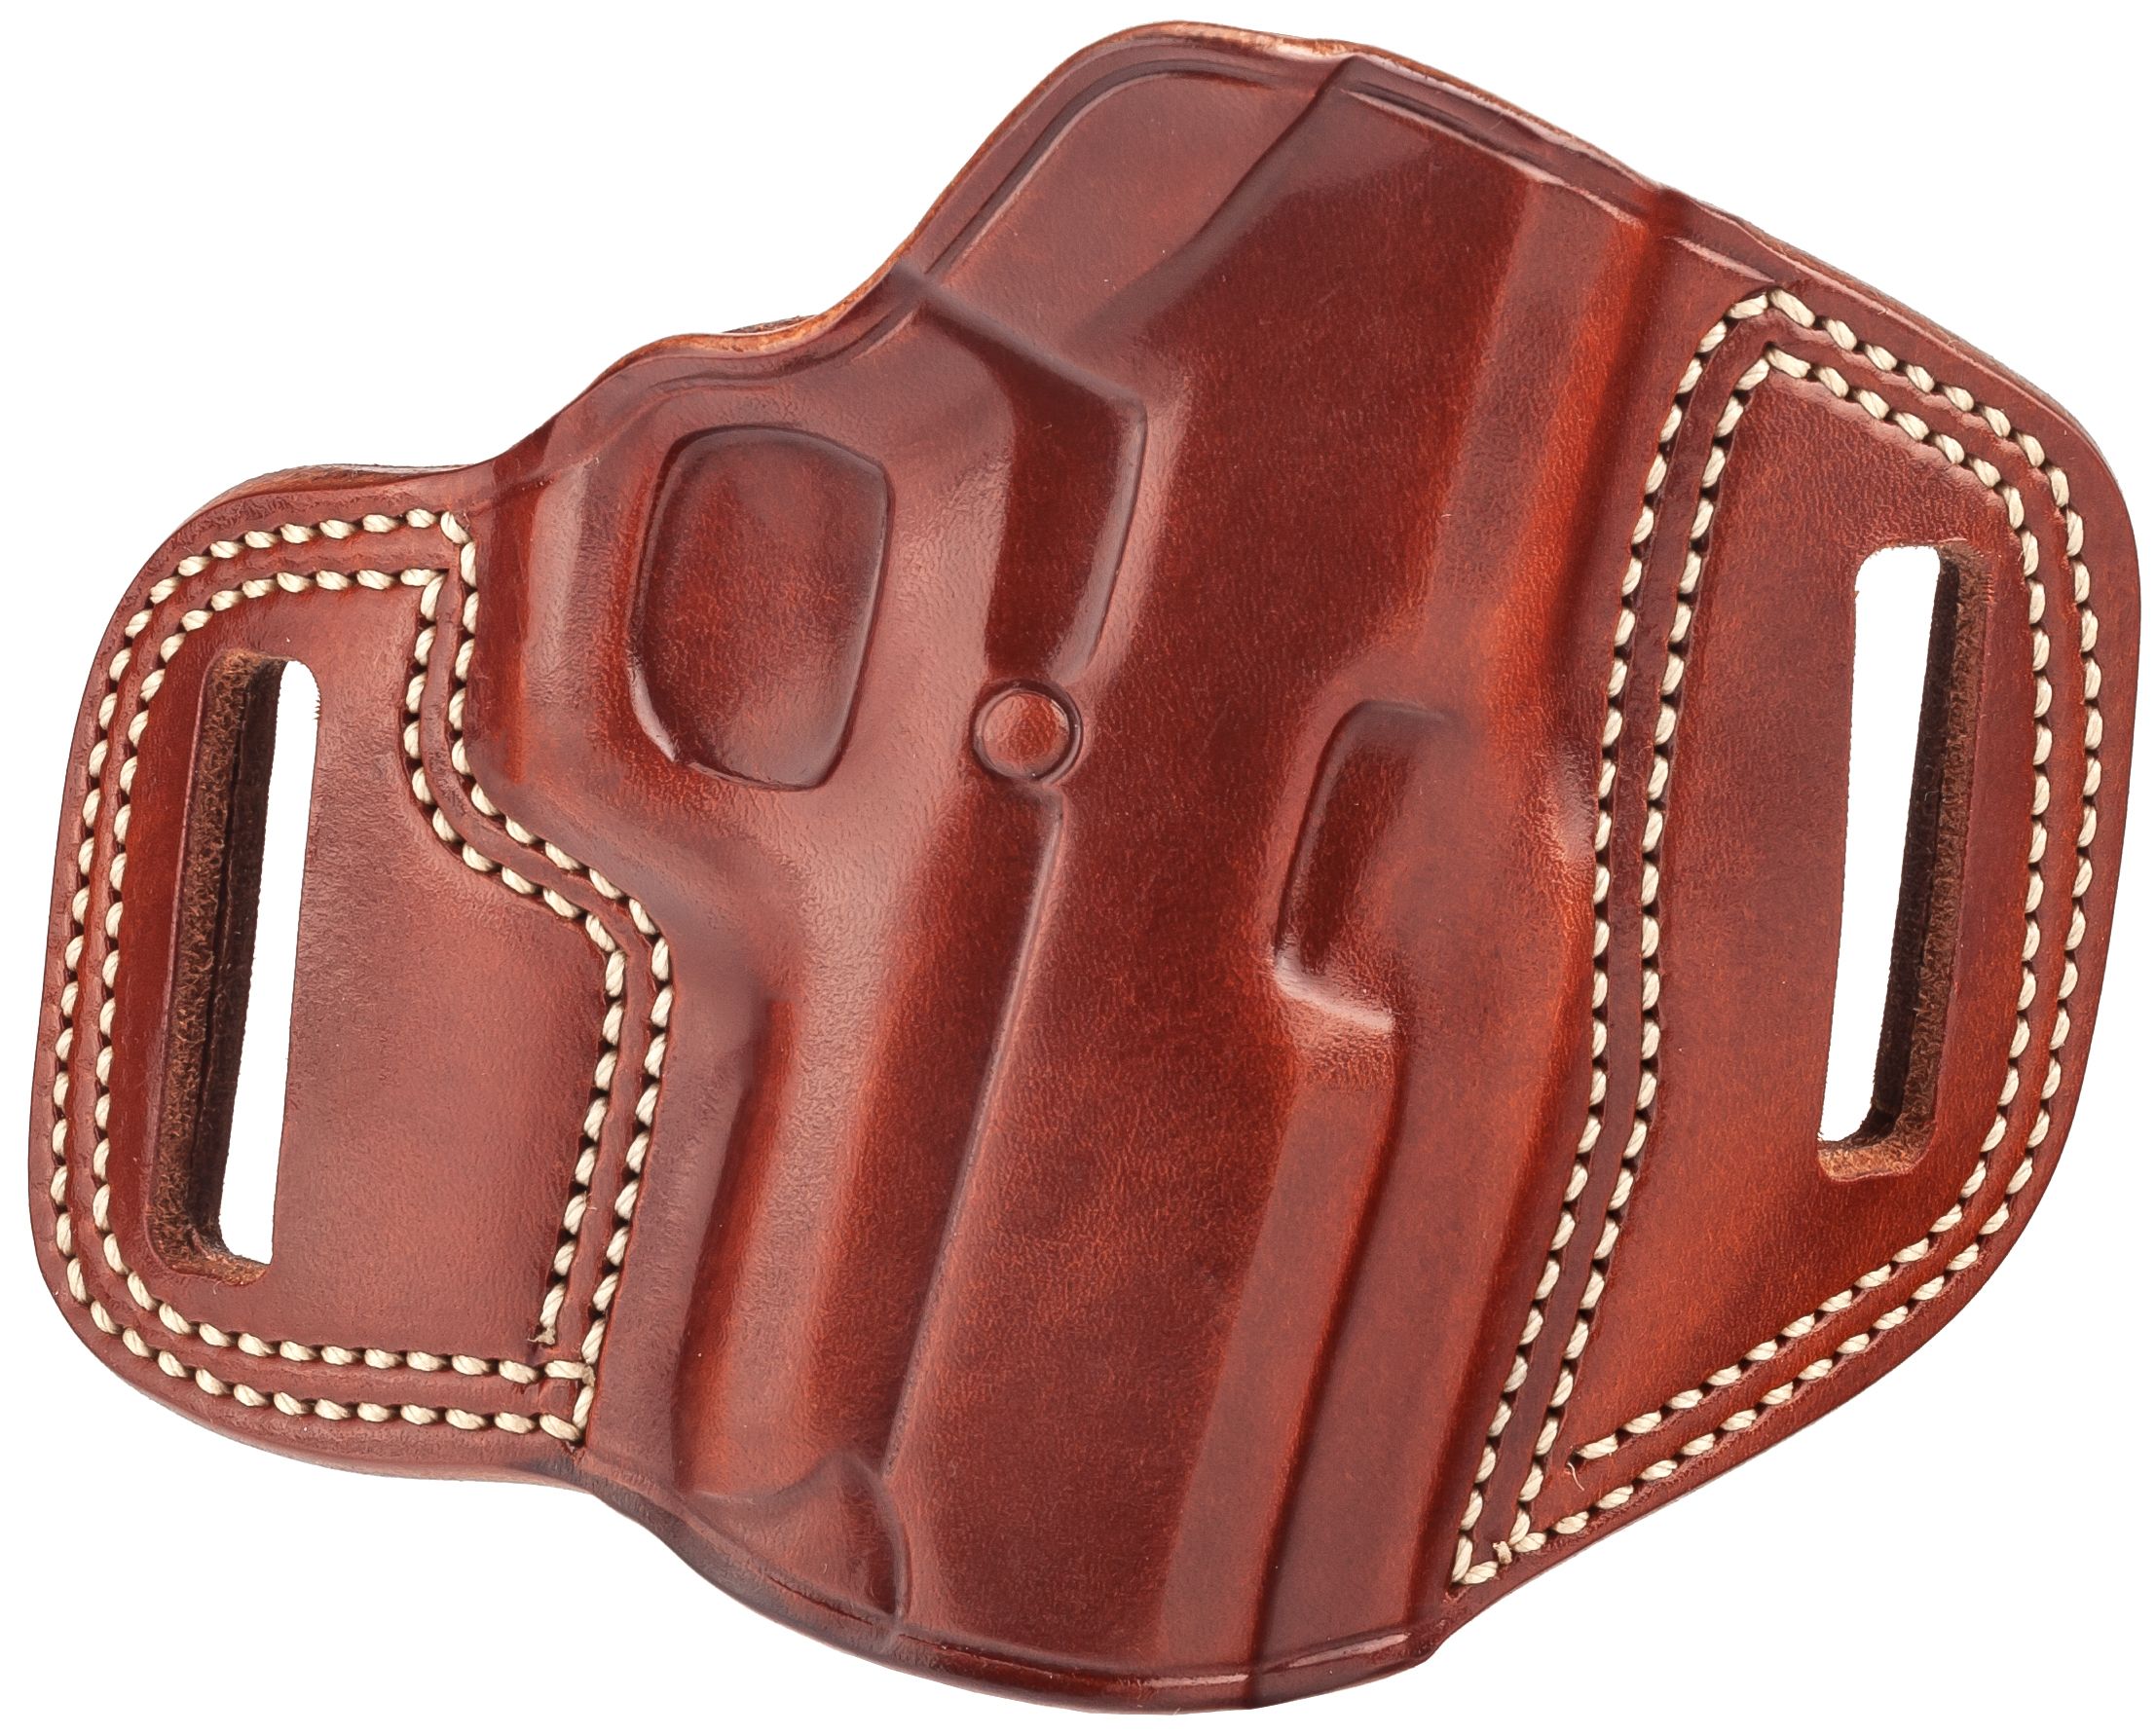 Galco Combat Master Concealment Holster - Right Hand Tan 3 in. 1911 : CM424